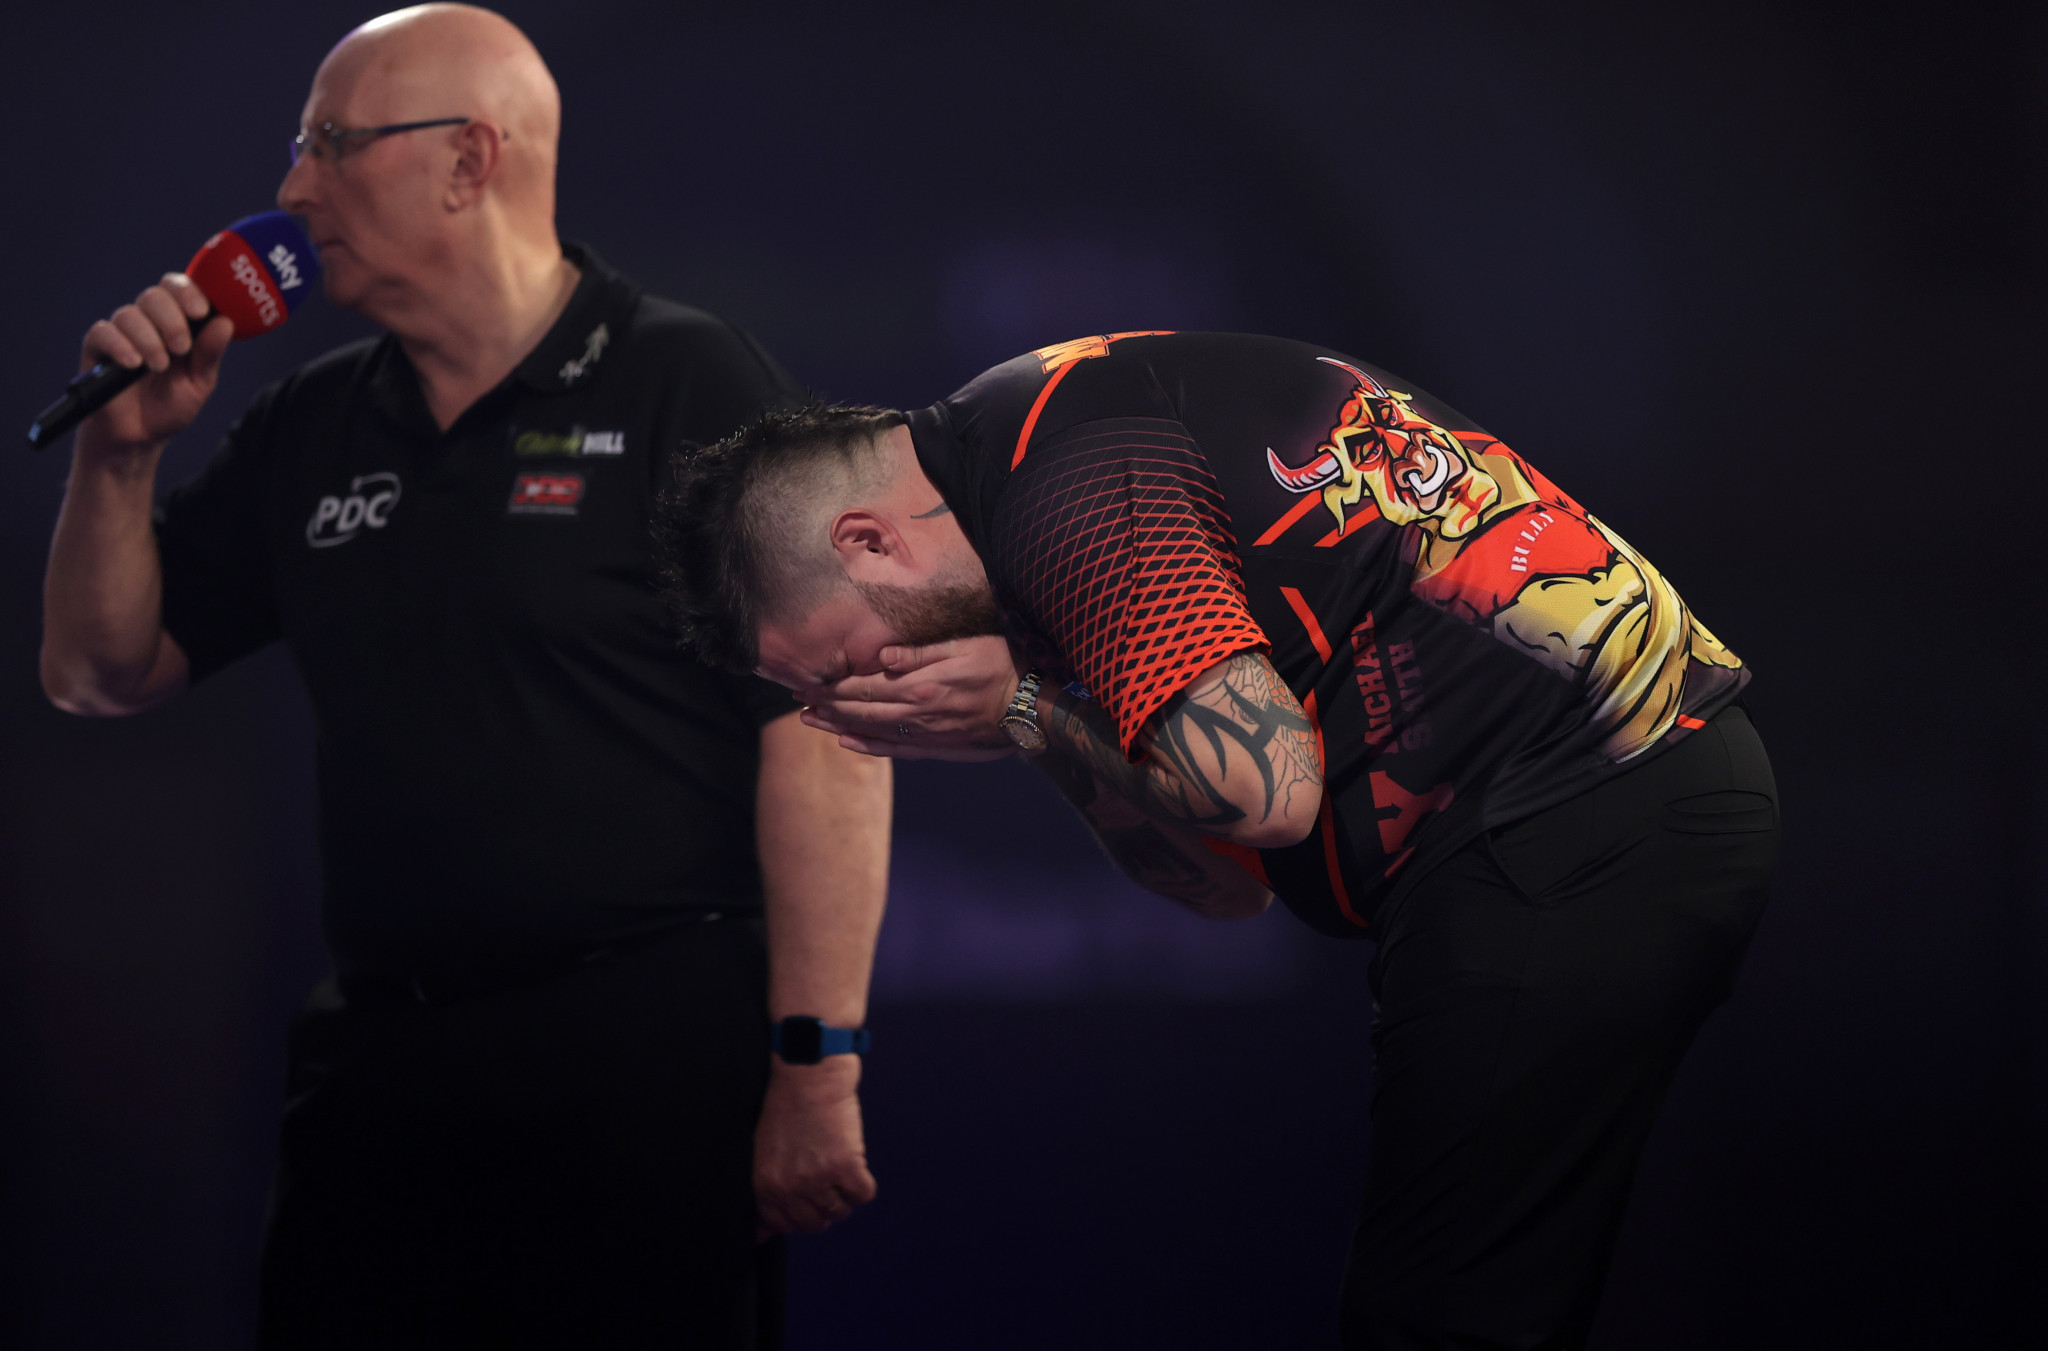 Fourth seed Smith latest high-profile player to fall at World Darts Championship